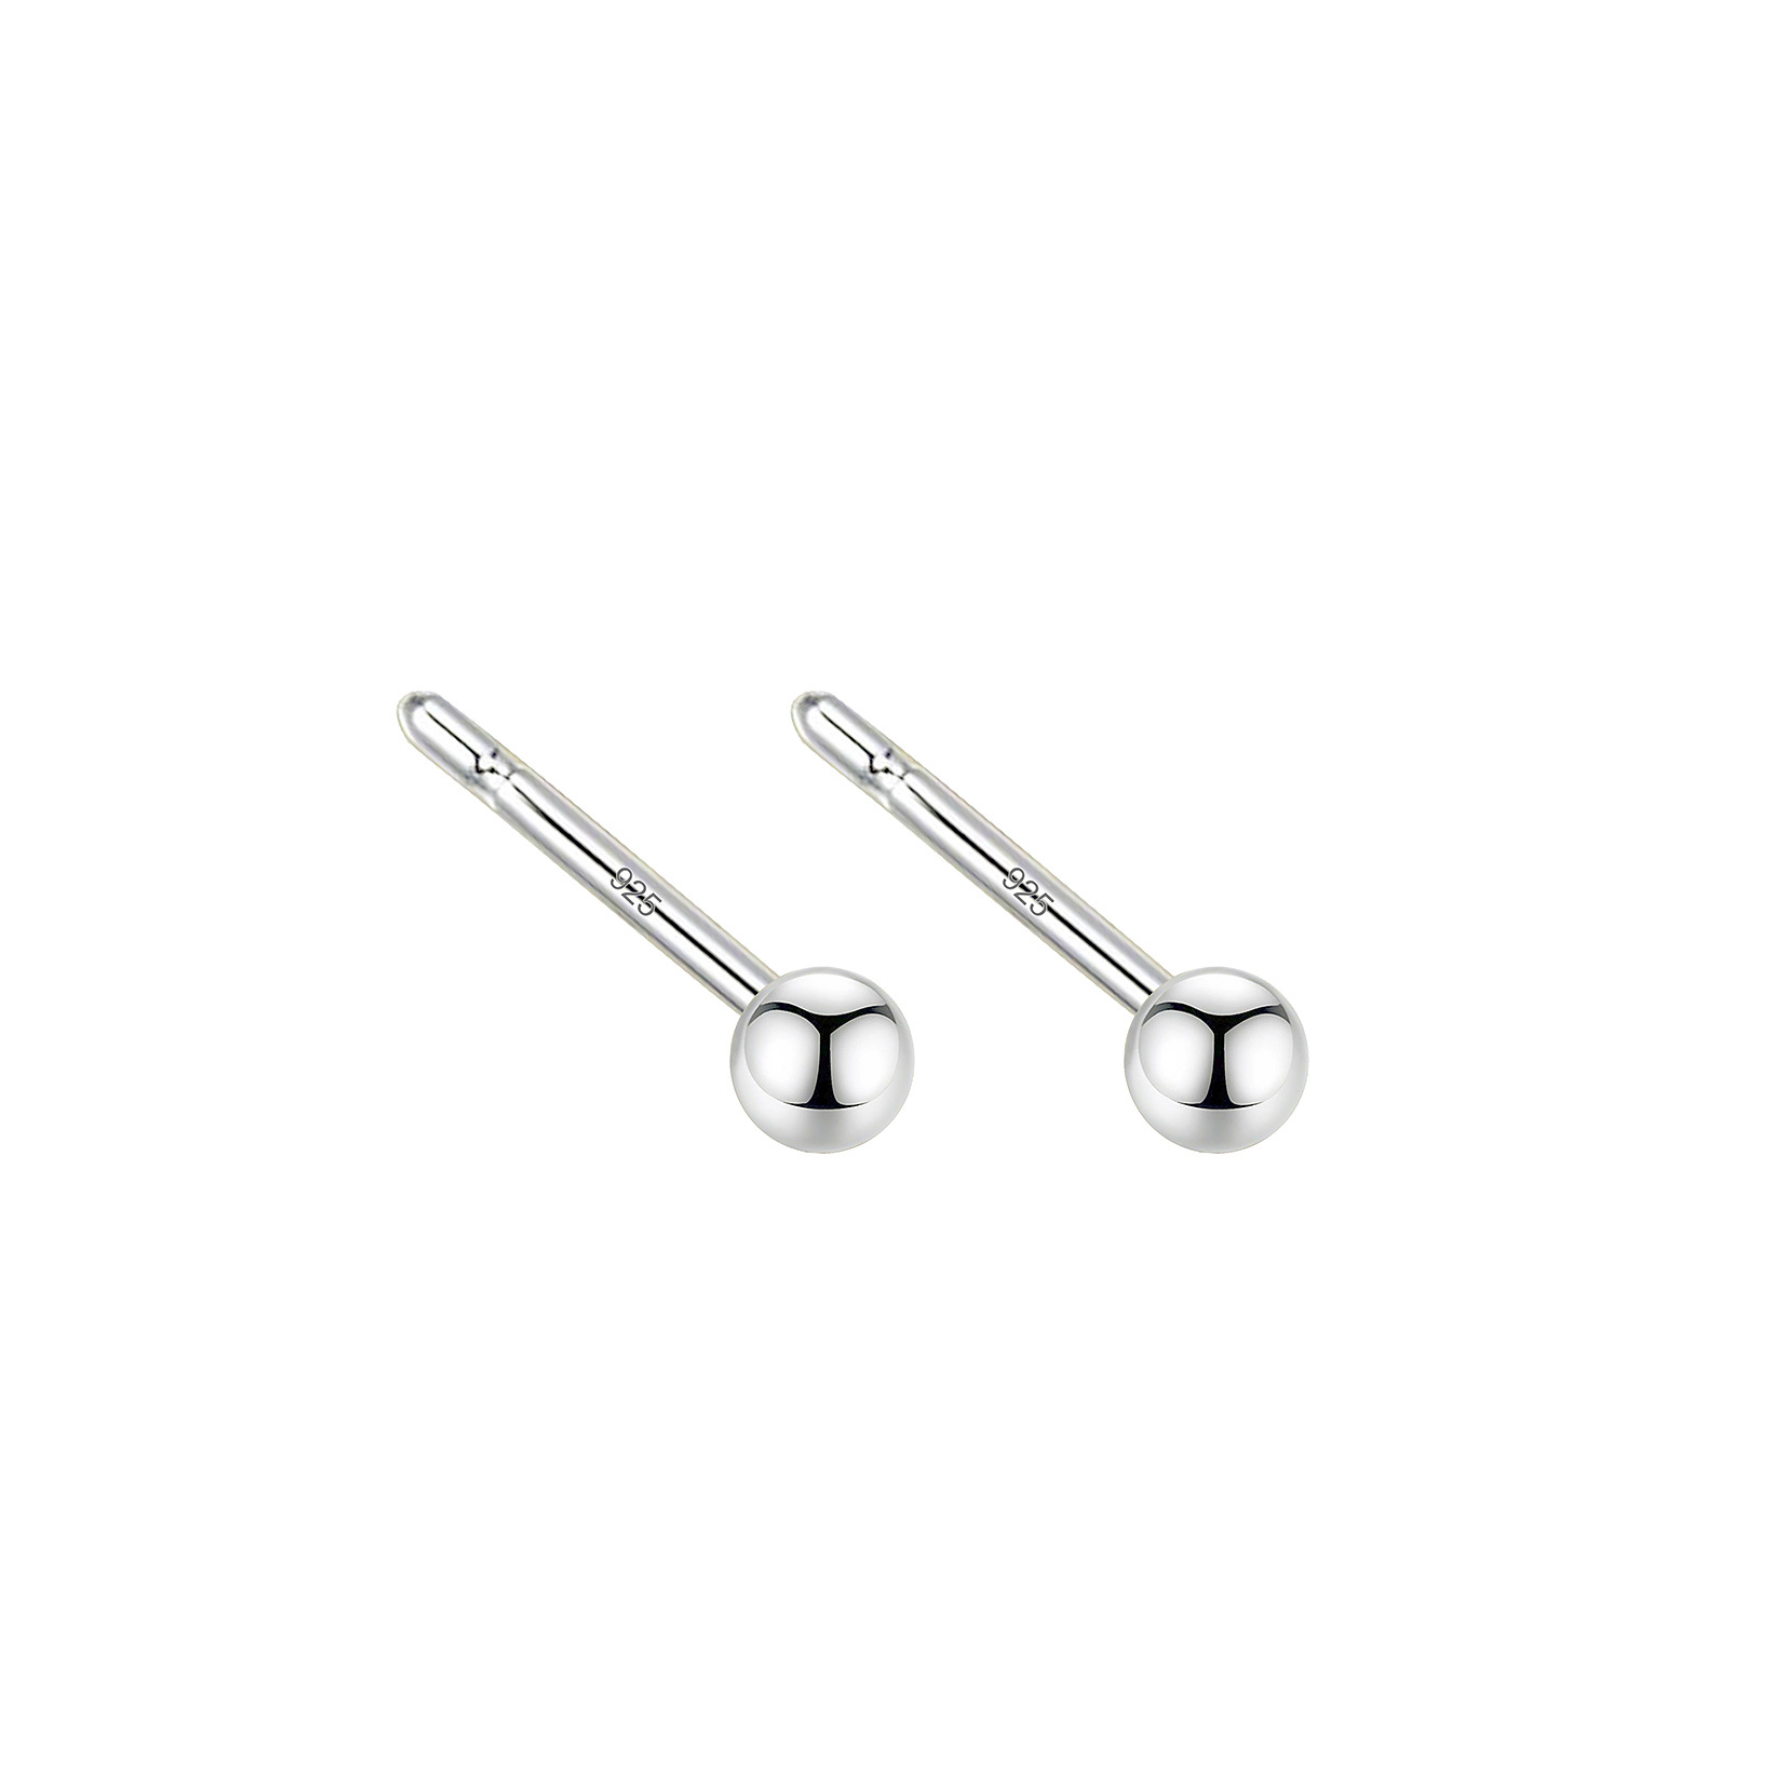 Noell Beads Studs from A-Hjort Jewellery in Silver Sterling 925